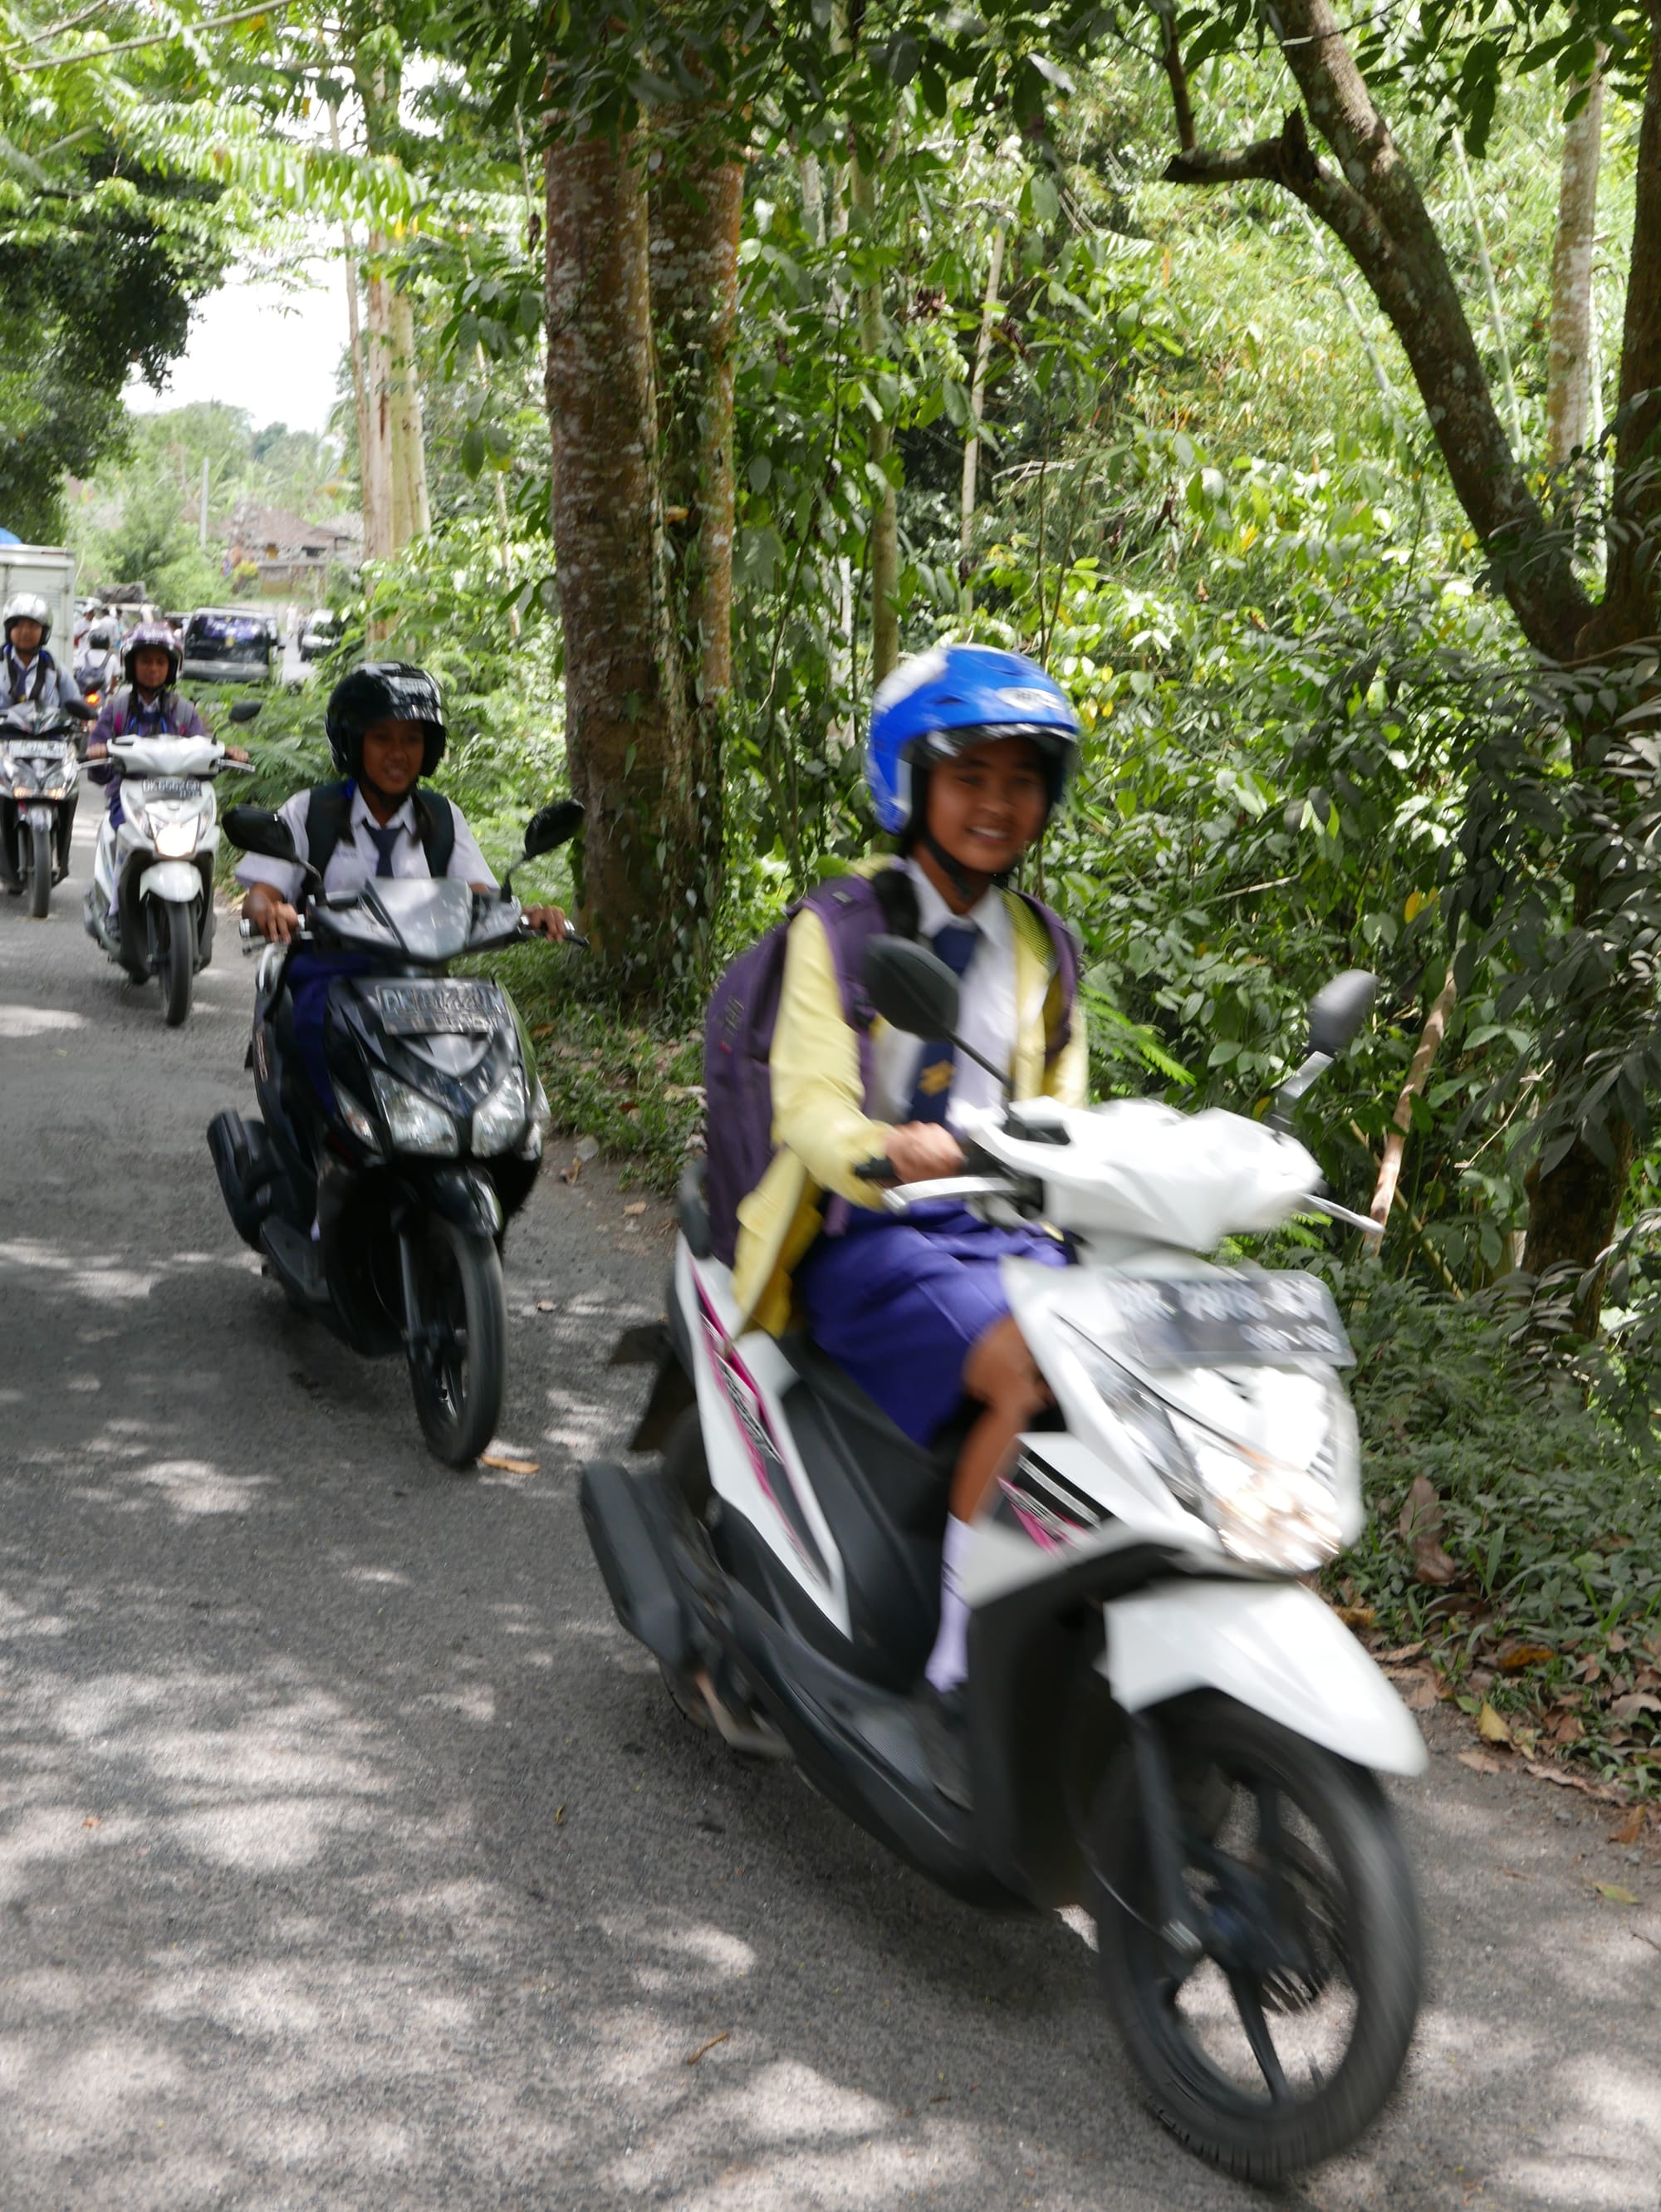 Photo by Author — passing motorbikes in Bali